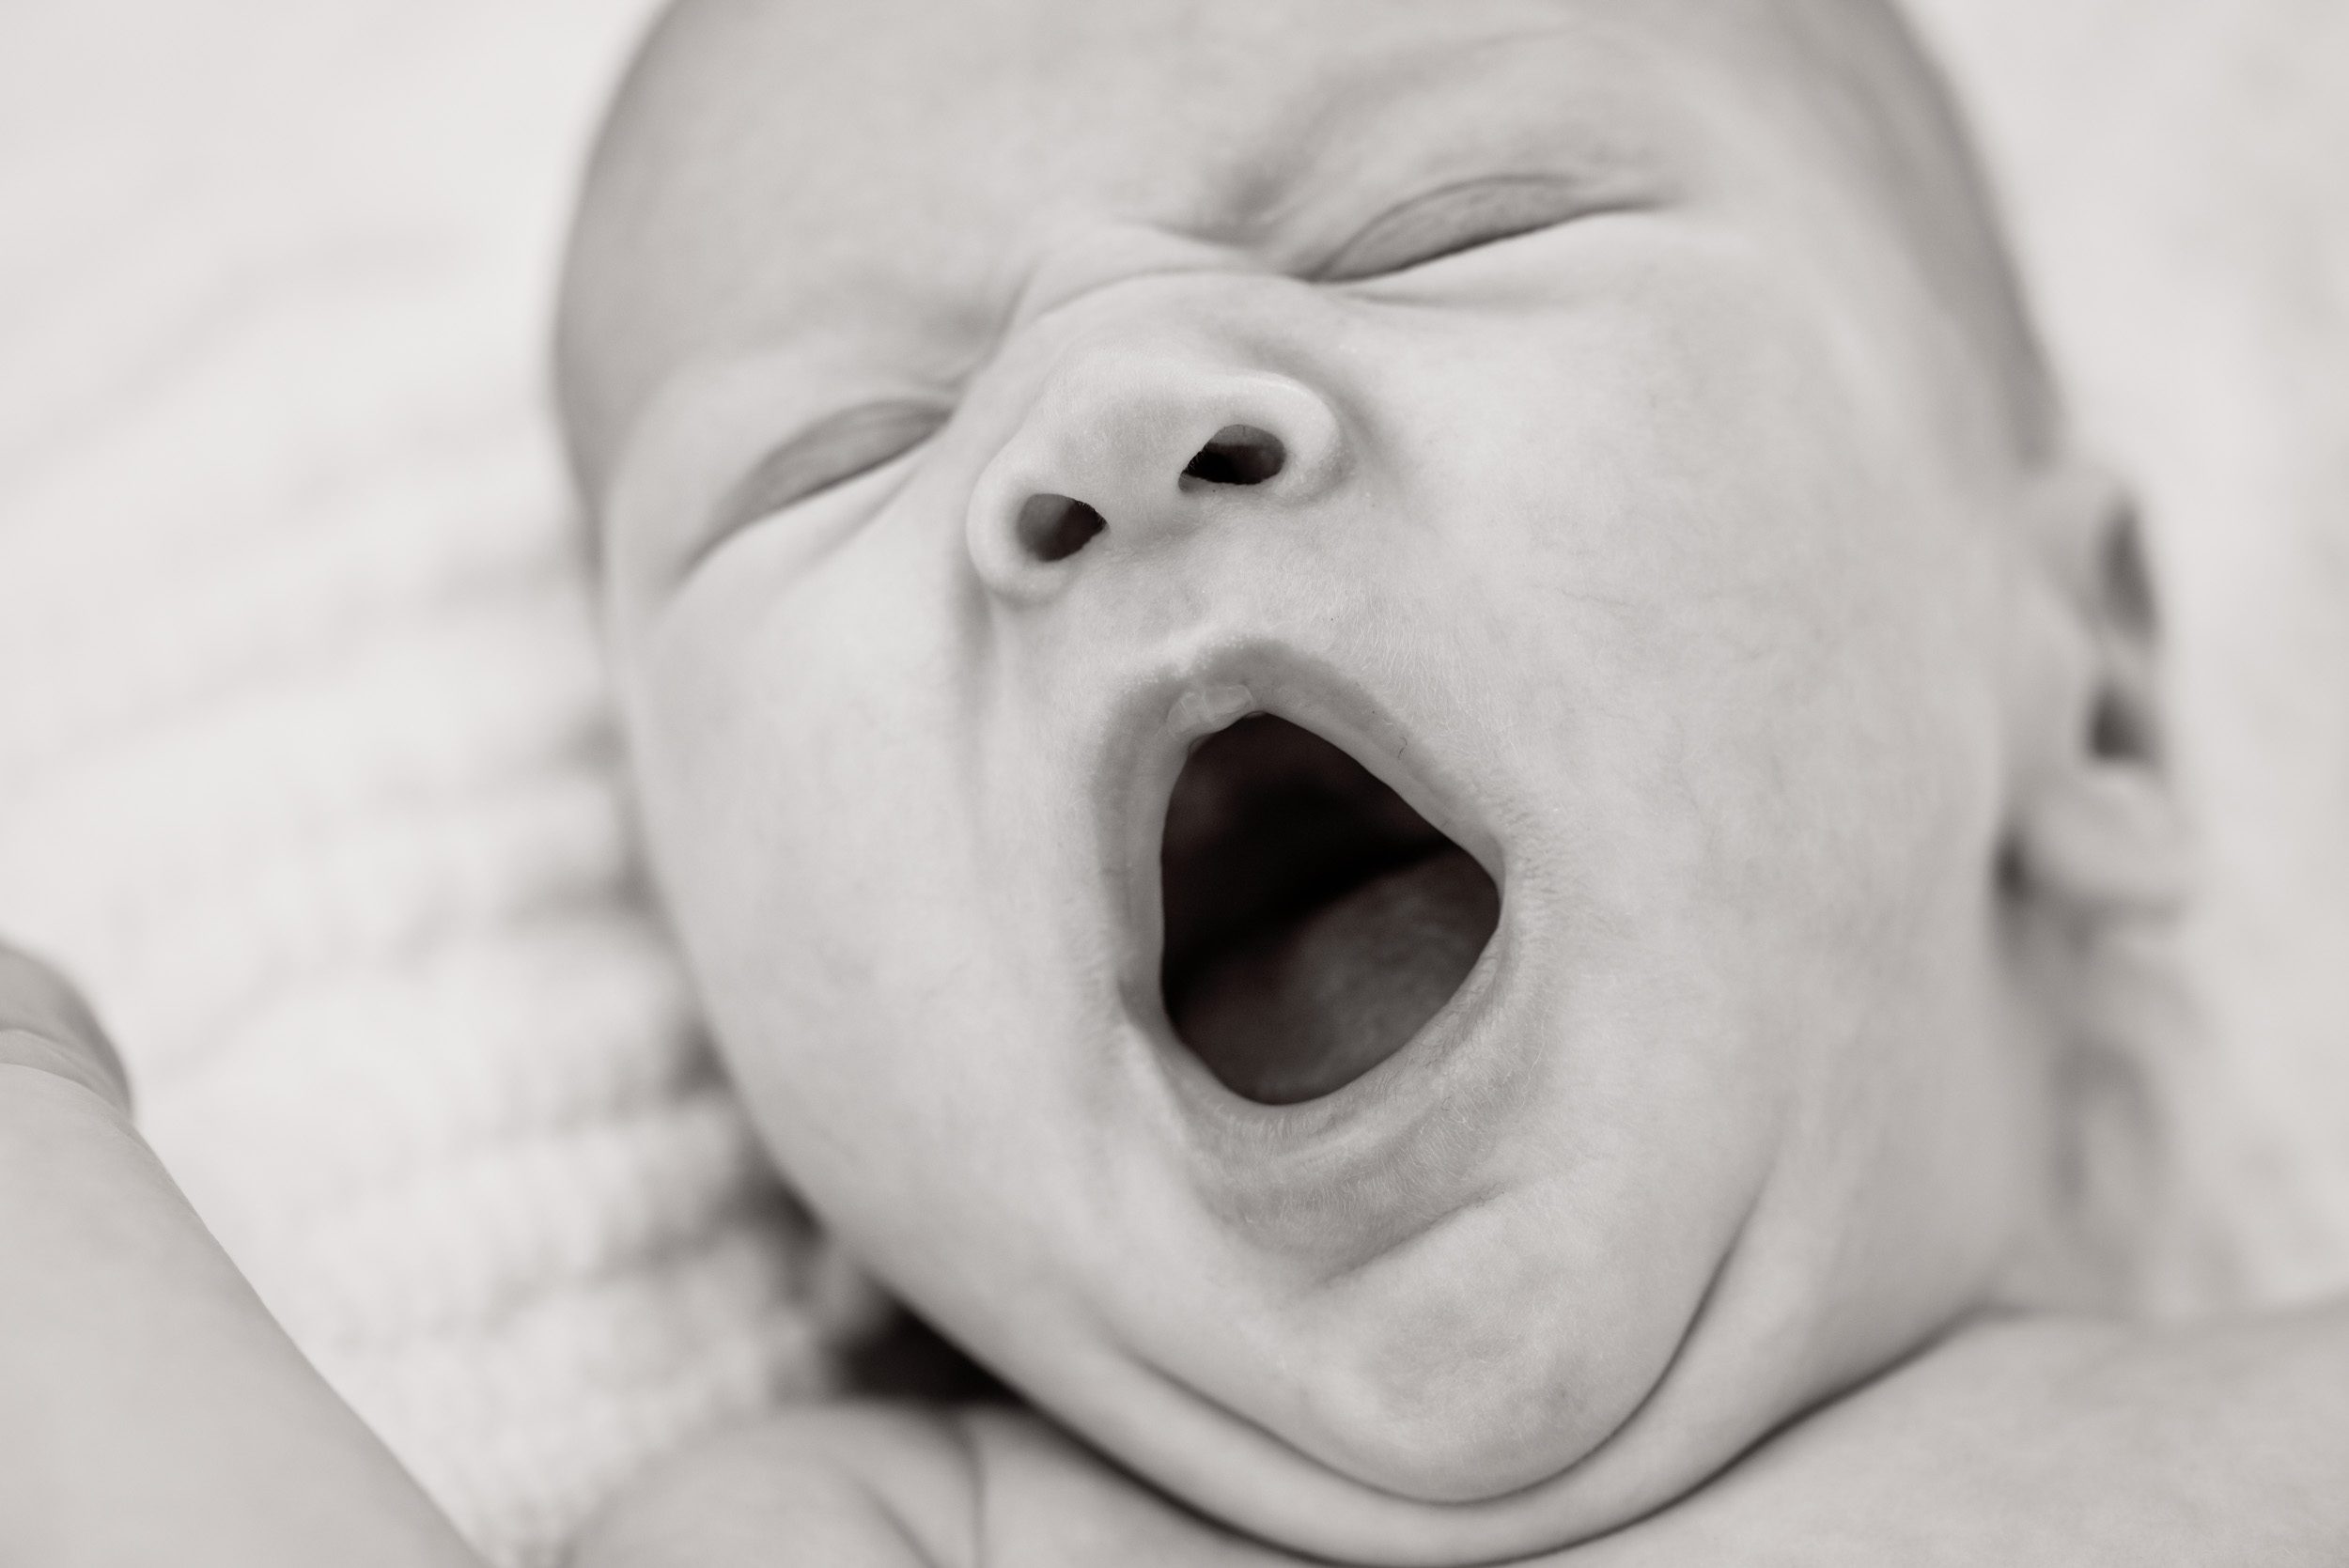 Black and white close-up of a newborn baby boy yawning during a natural newborn photo session